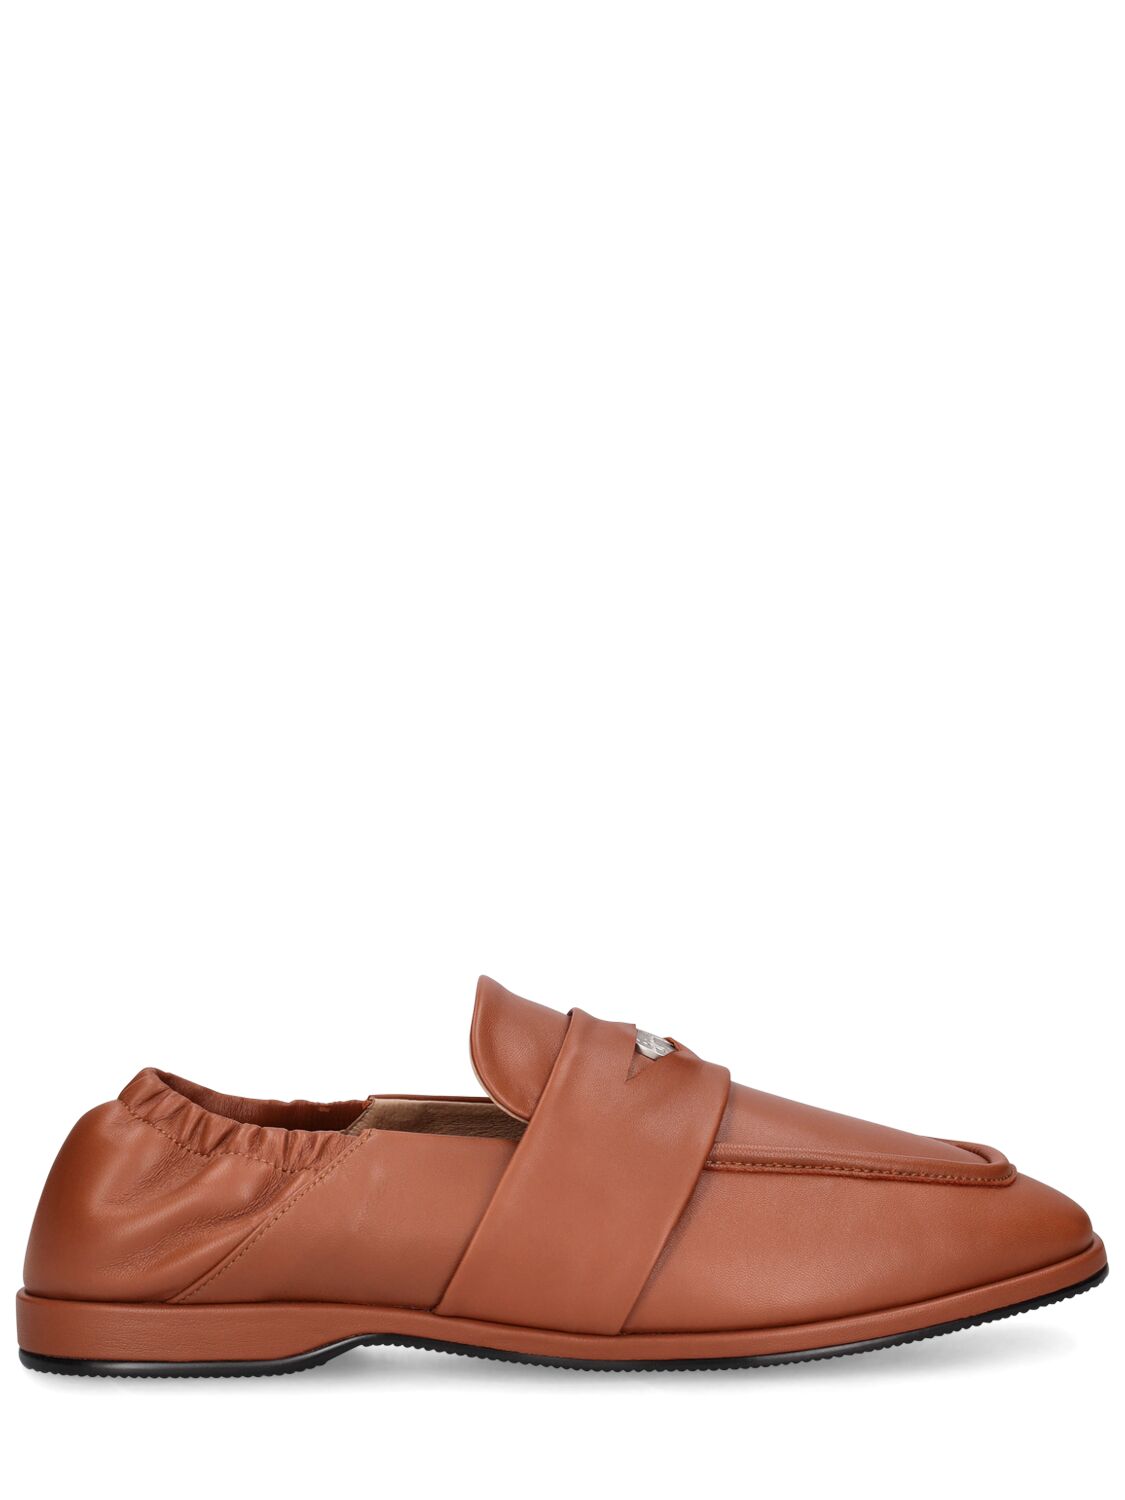 After Pray Square Penny Loafers W/ Band In Tan Brown